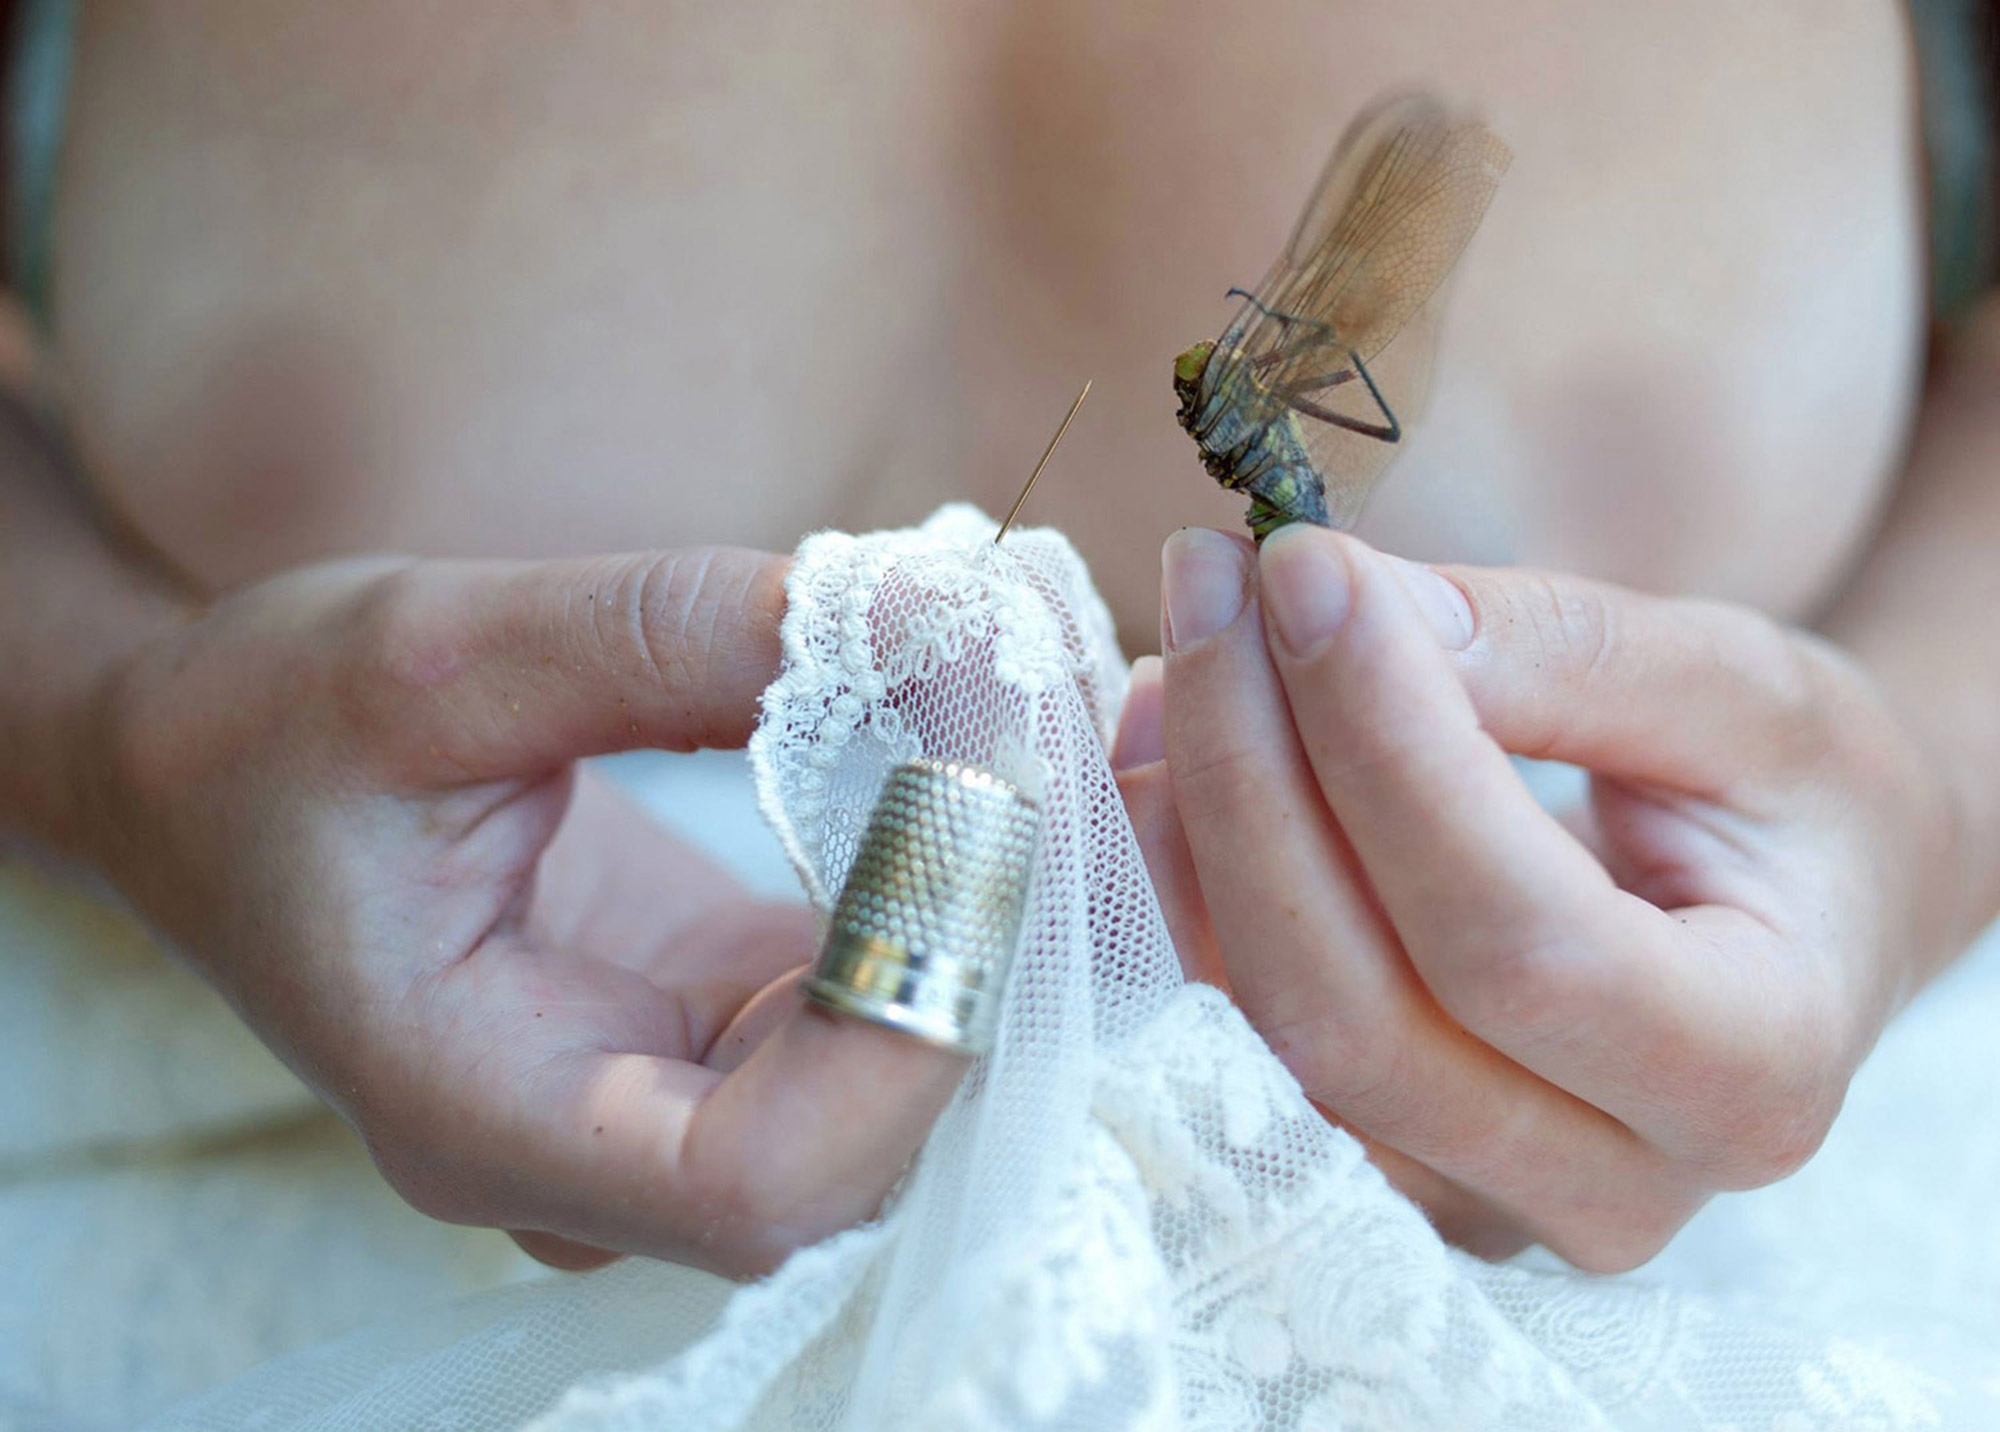 Ines Kozic - woman holding needle, thimble, and flying insect